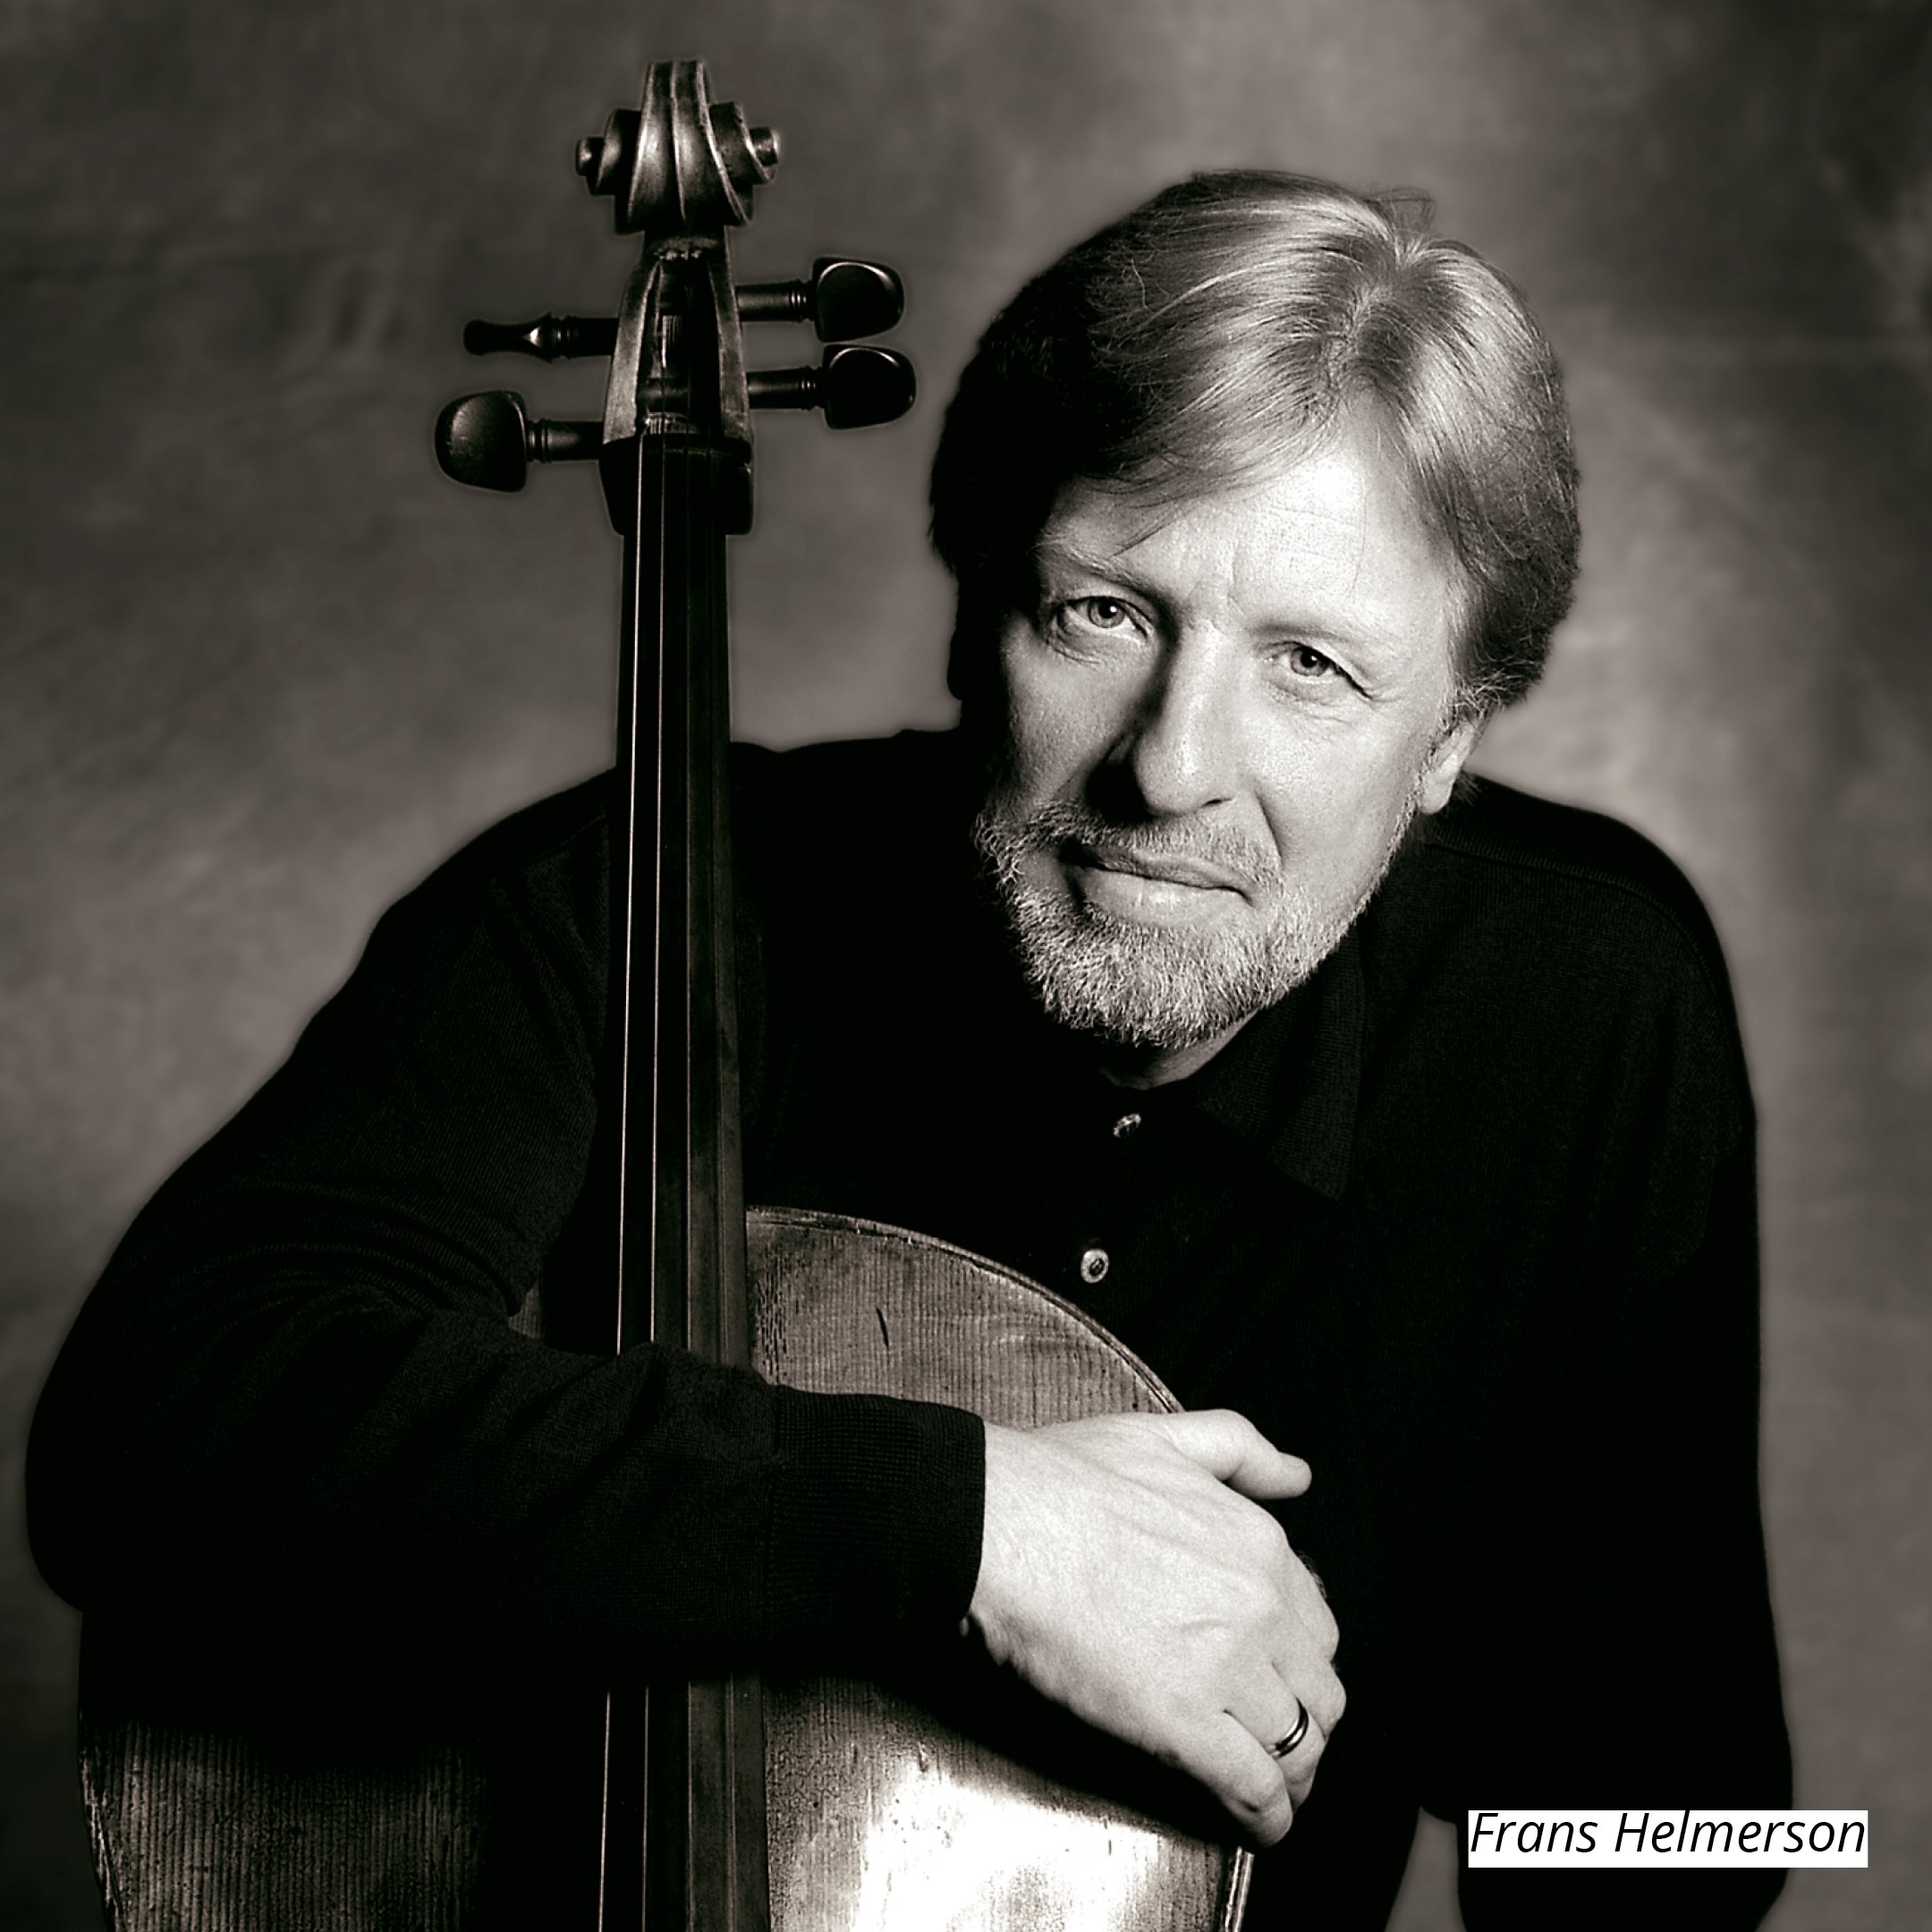 Frans Helmerson is among the performers of the Istanbul International Chamber Music Festival.